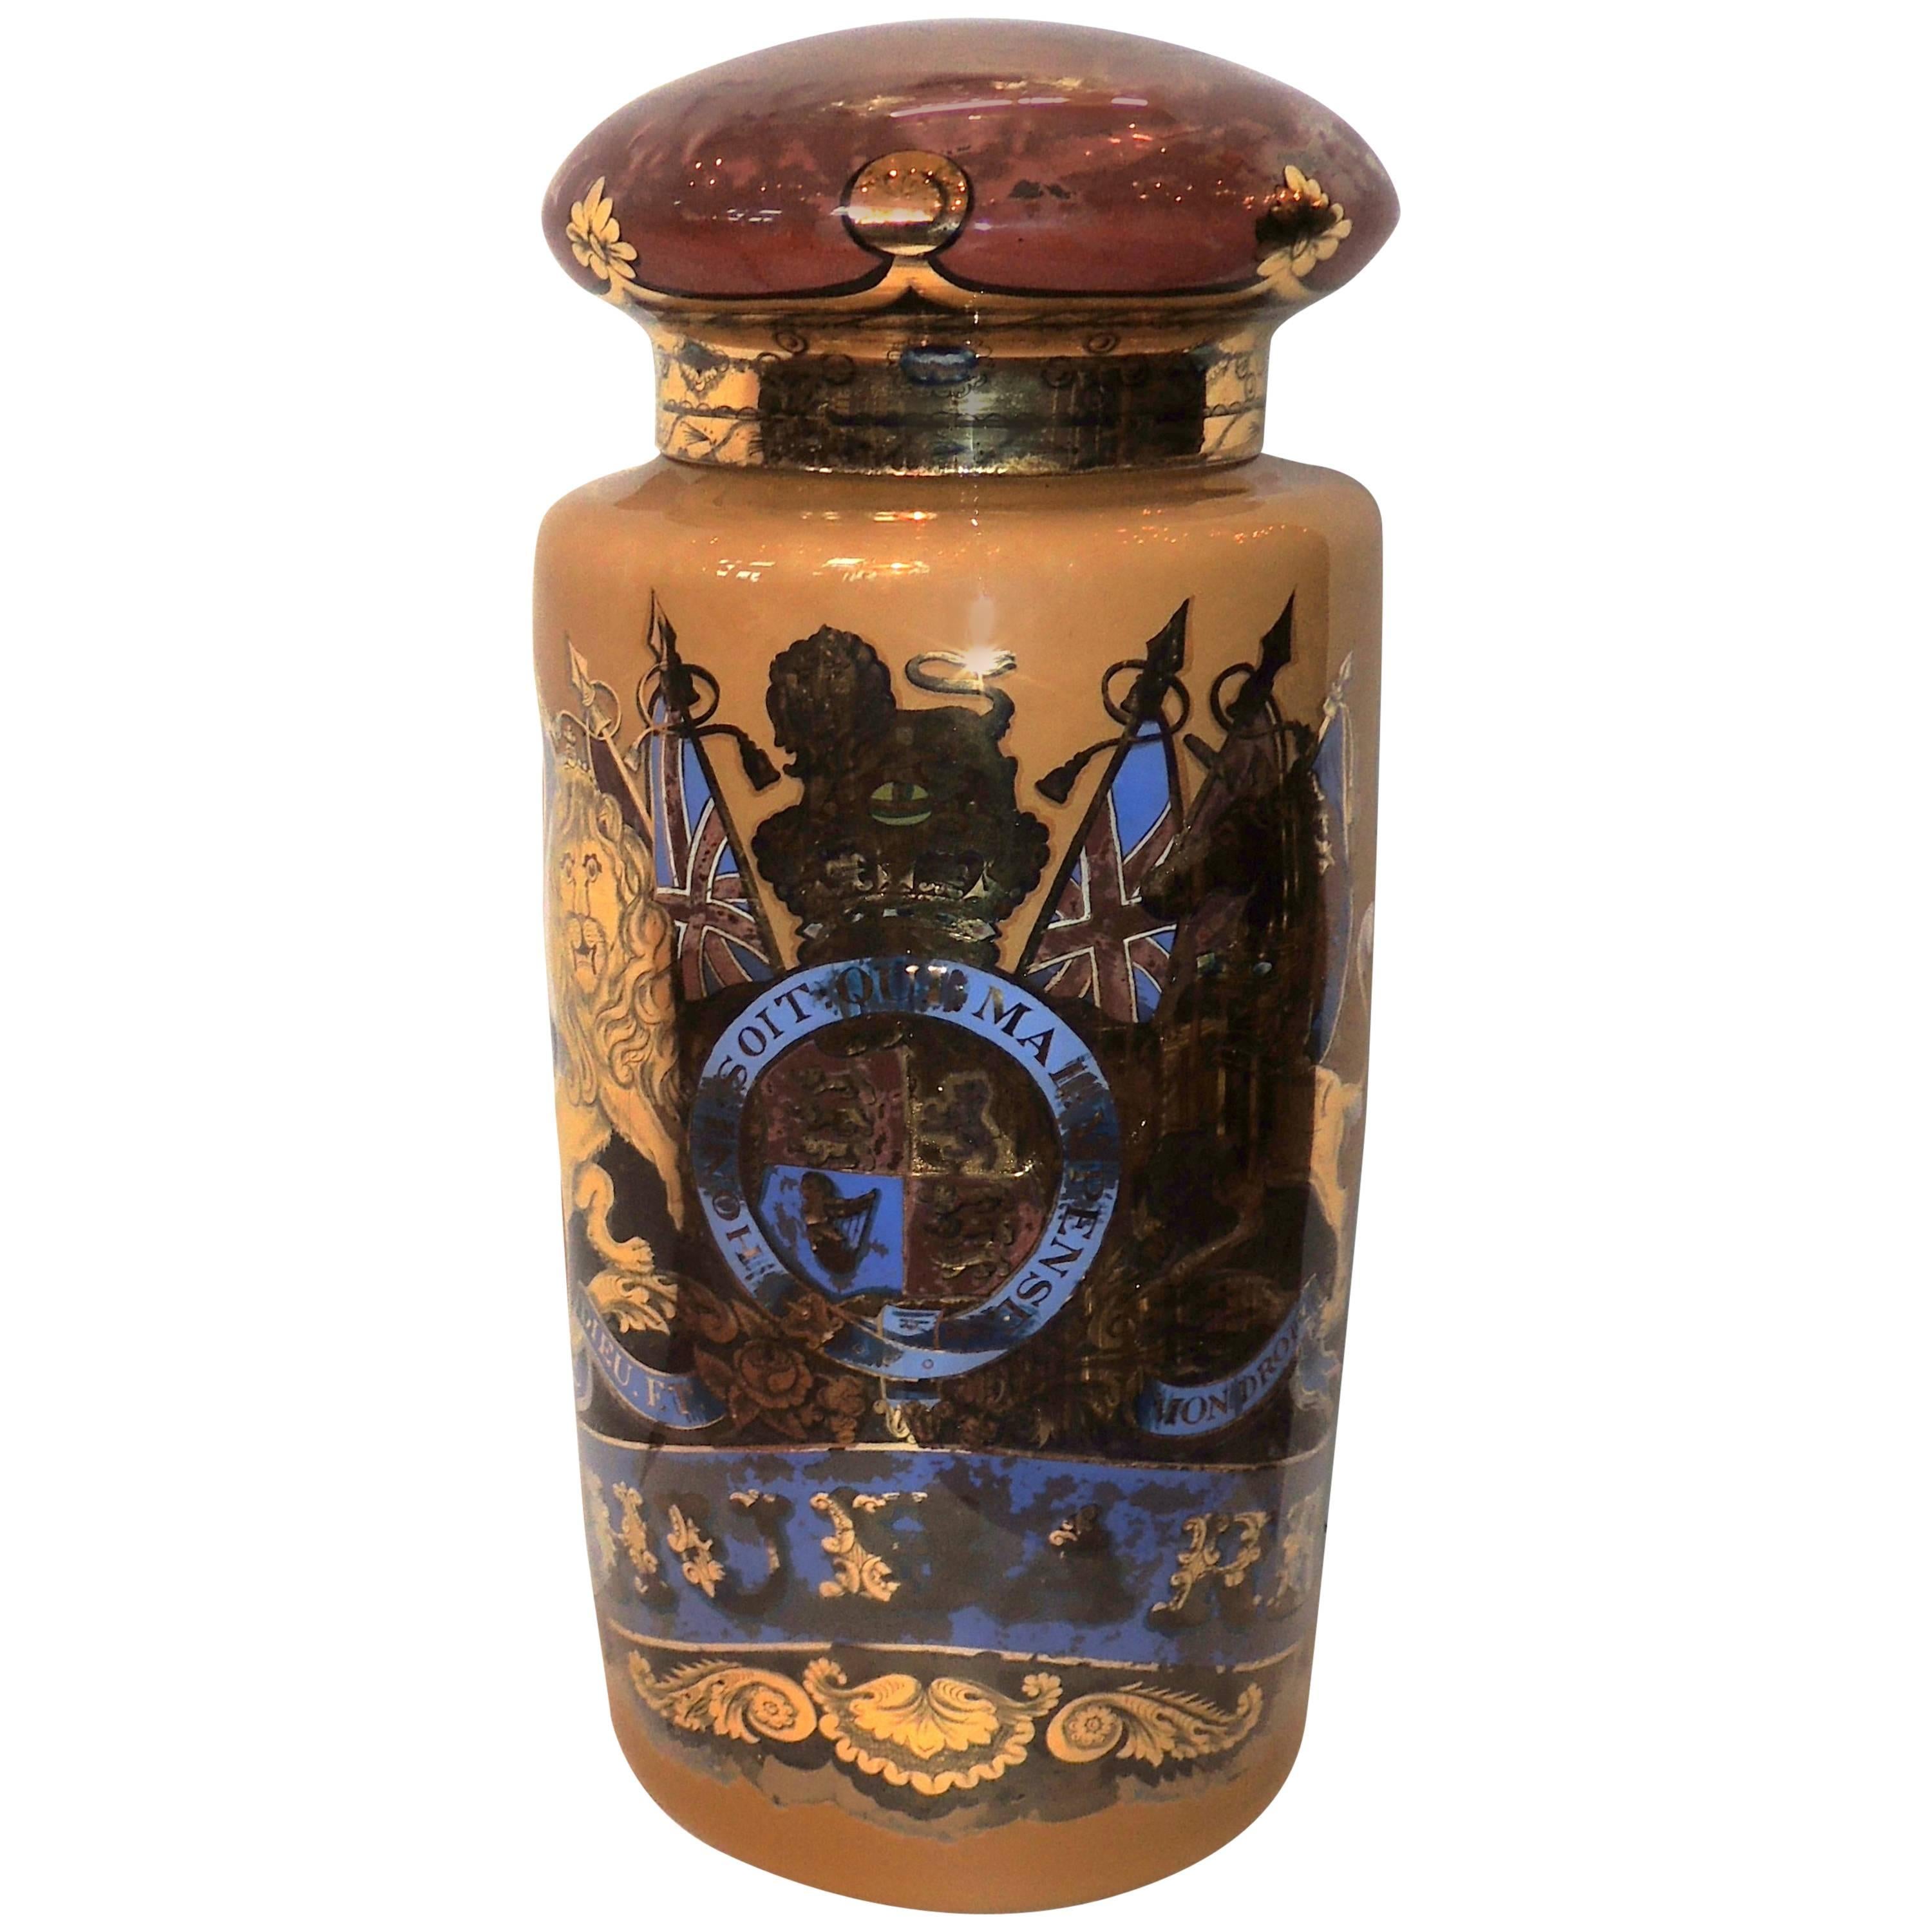 Wonderful Vintage Pharmacy Blown Glass Apothecary Jar Reverse Hand-Painted